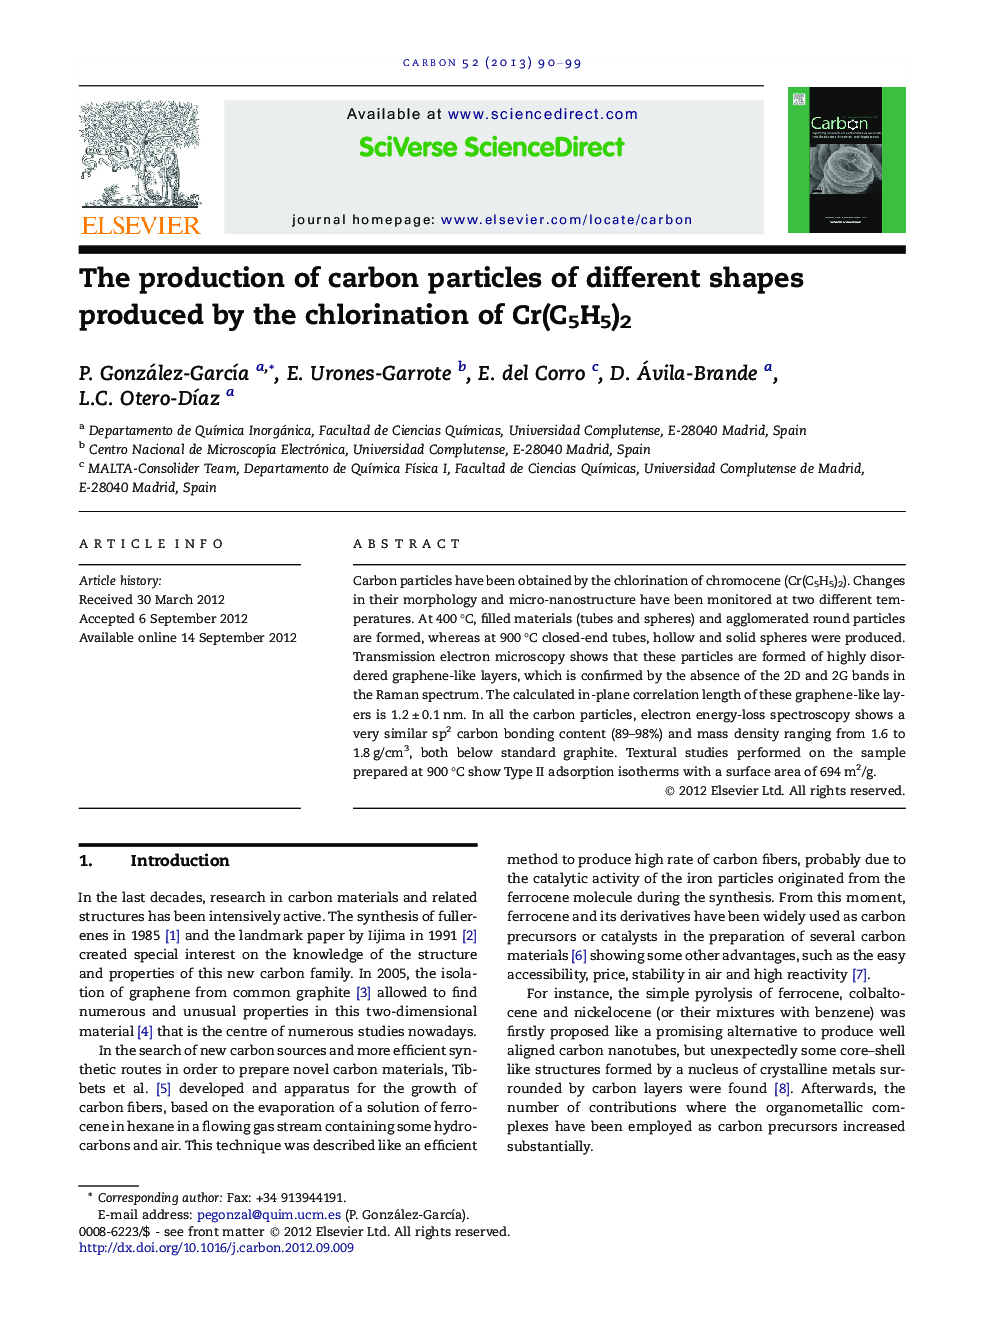 The production of carbon particles of different shapes produced by the chlorination of Cr(C5H5)2